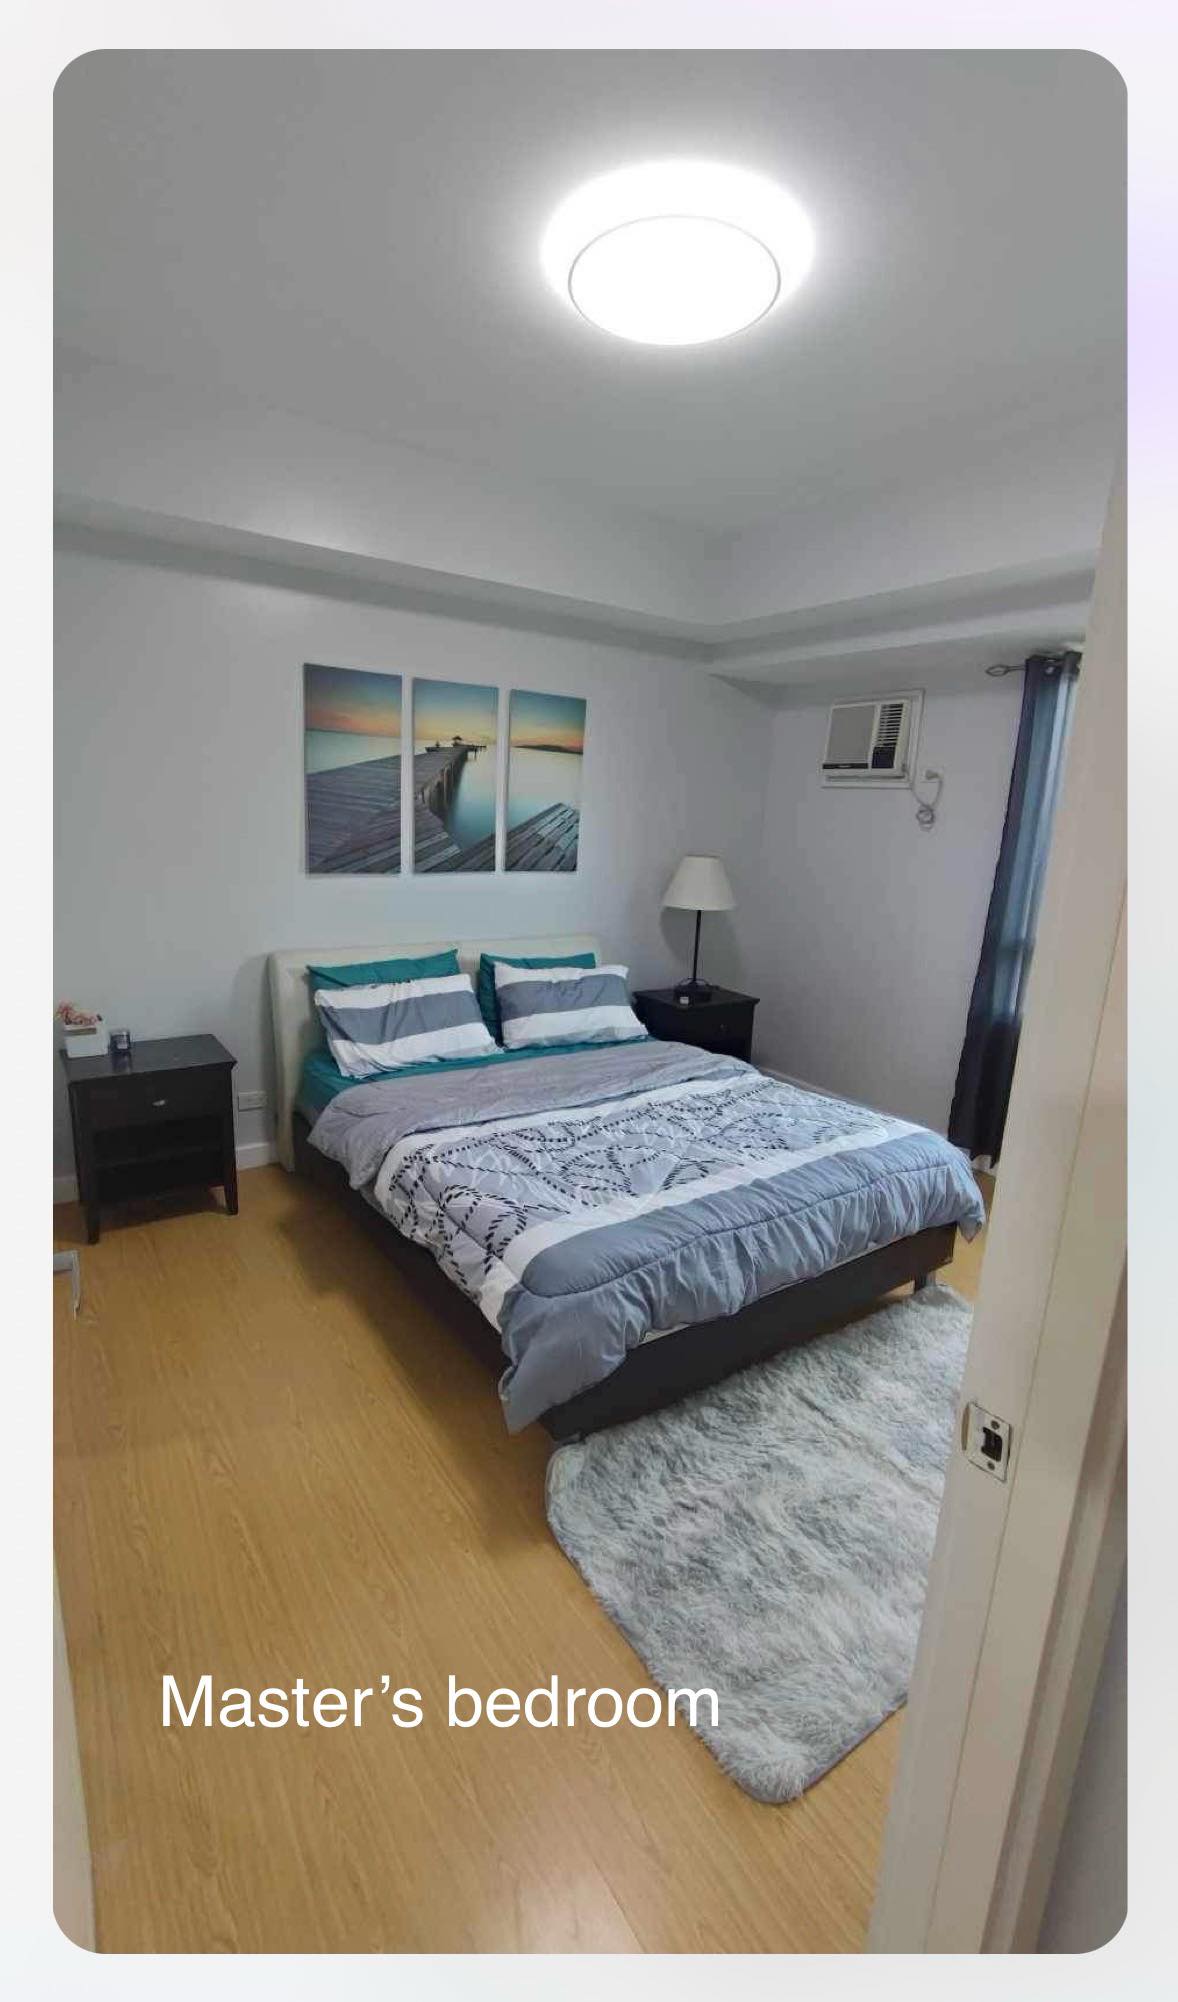 For Rent 2BR w/ parking The Grove by Rockwell in Pasig City